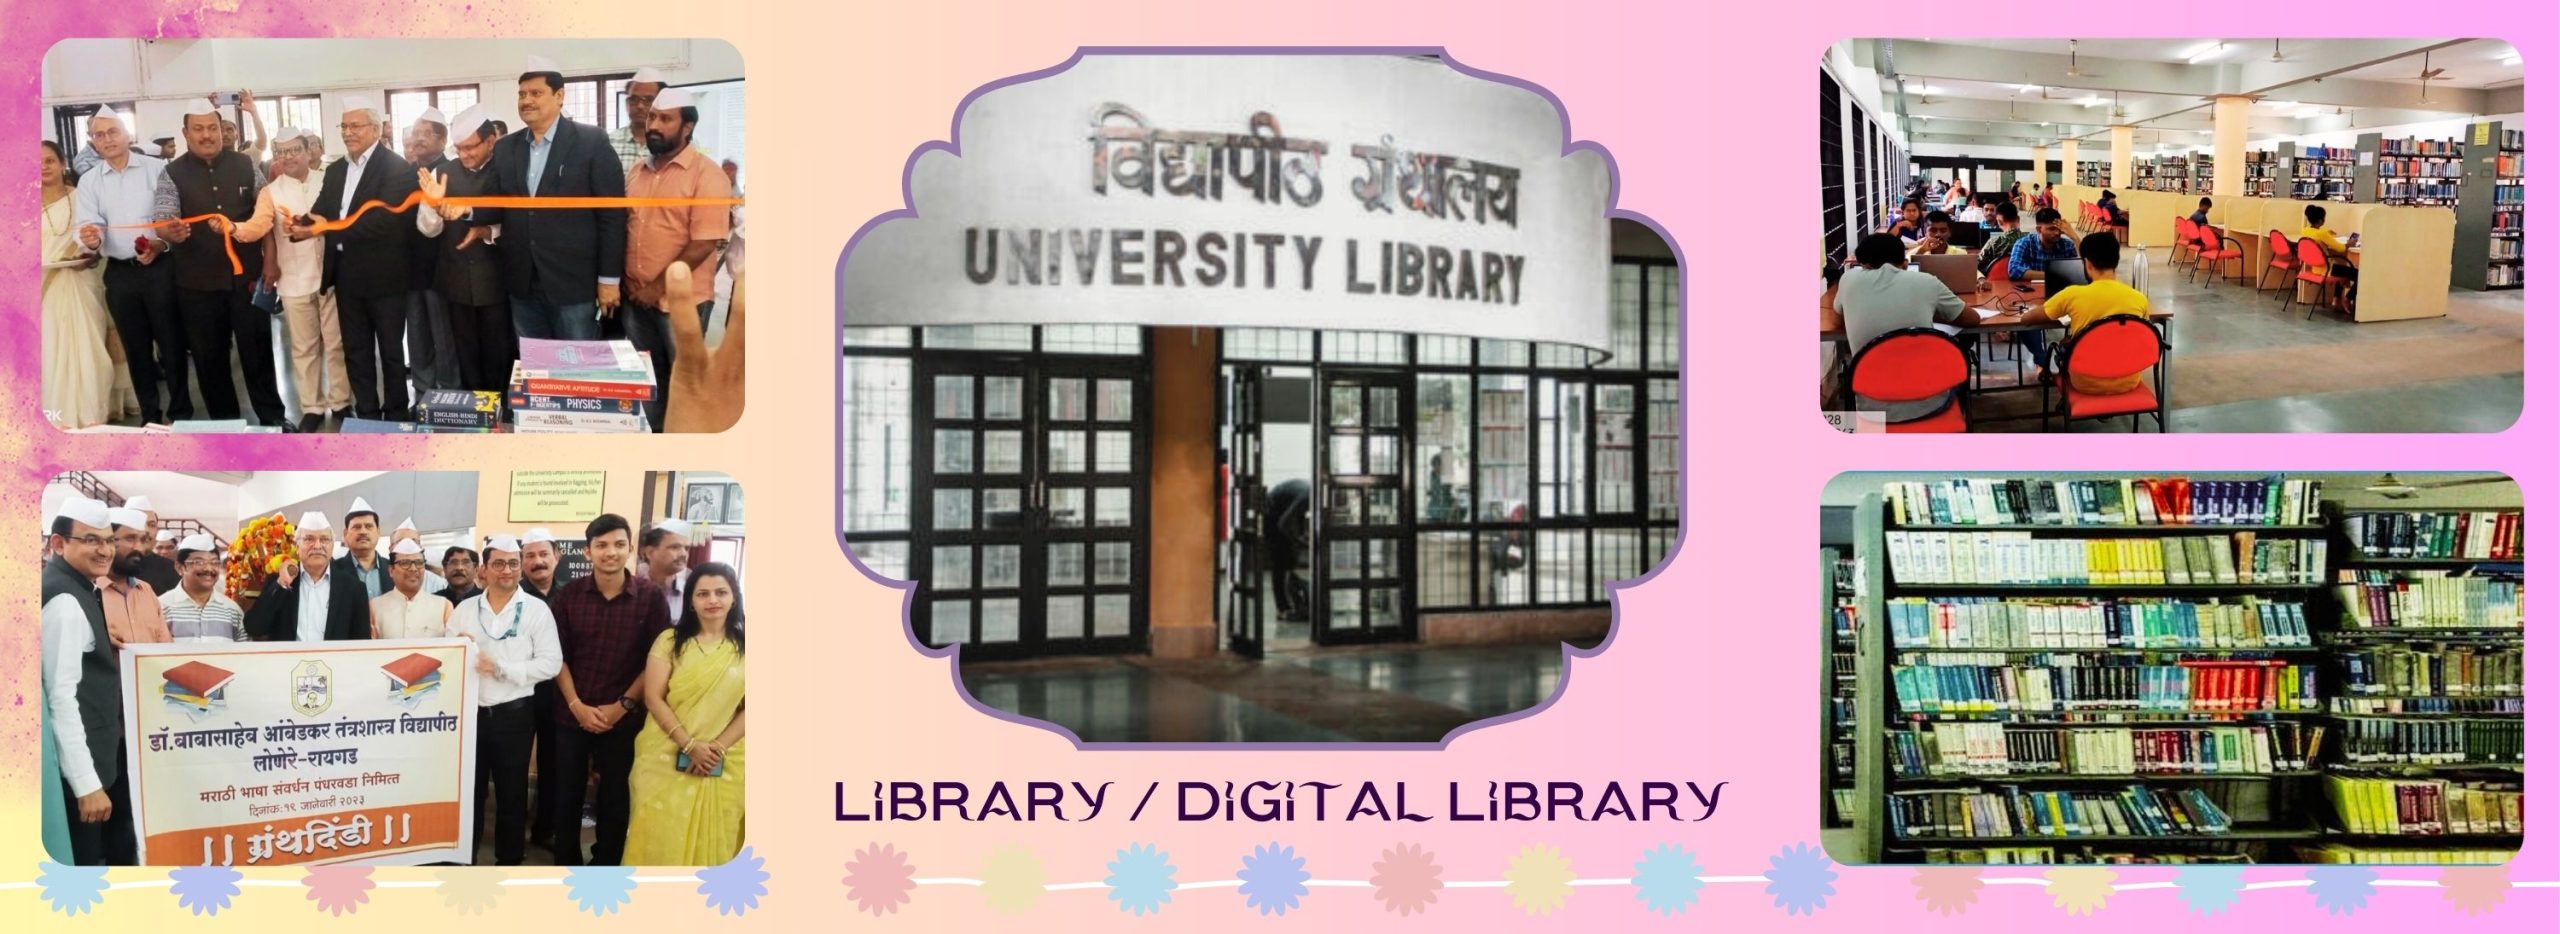 Library services - University Centre for Academic English - The